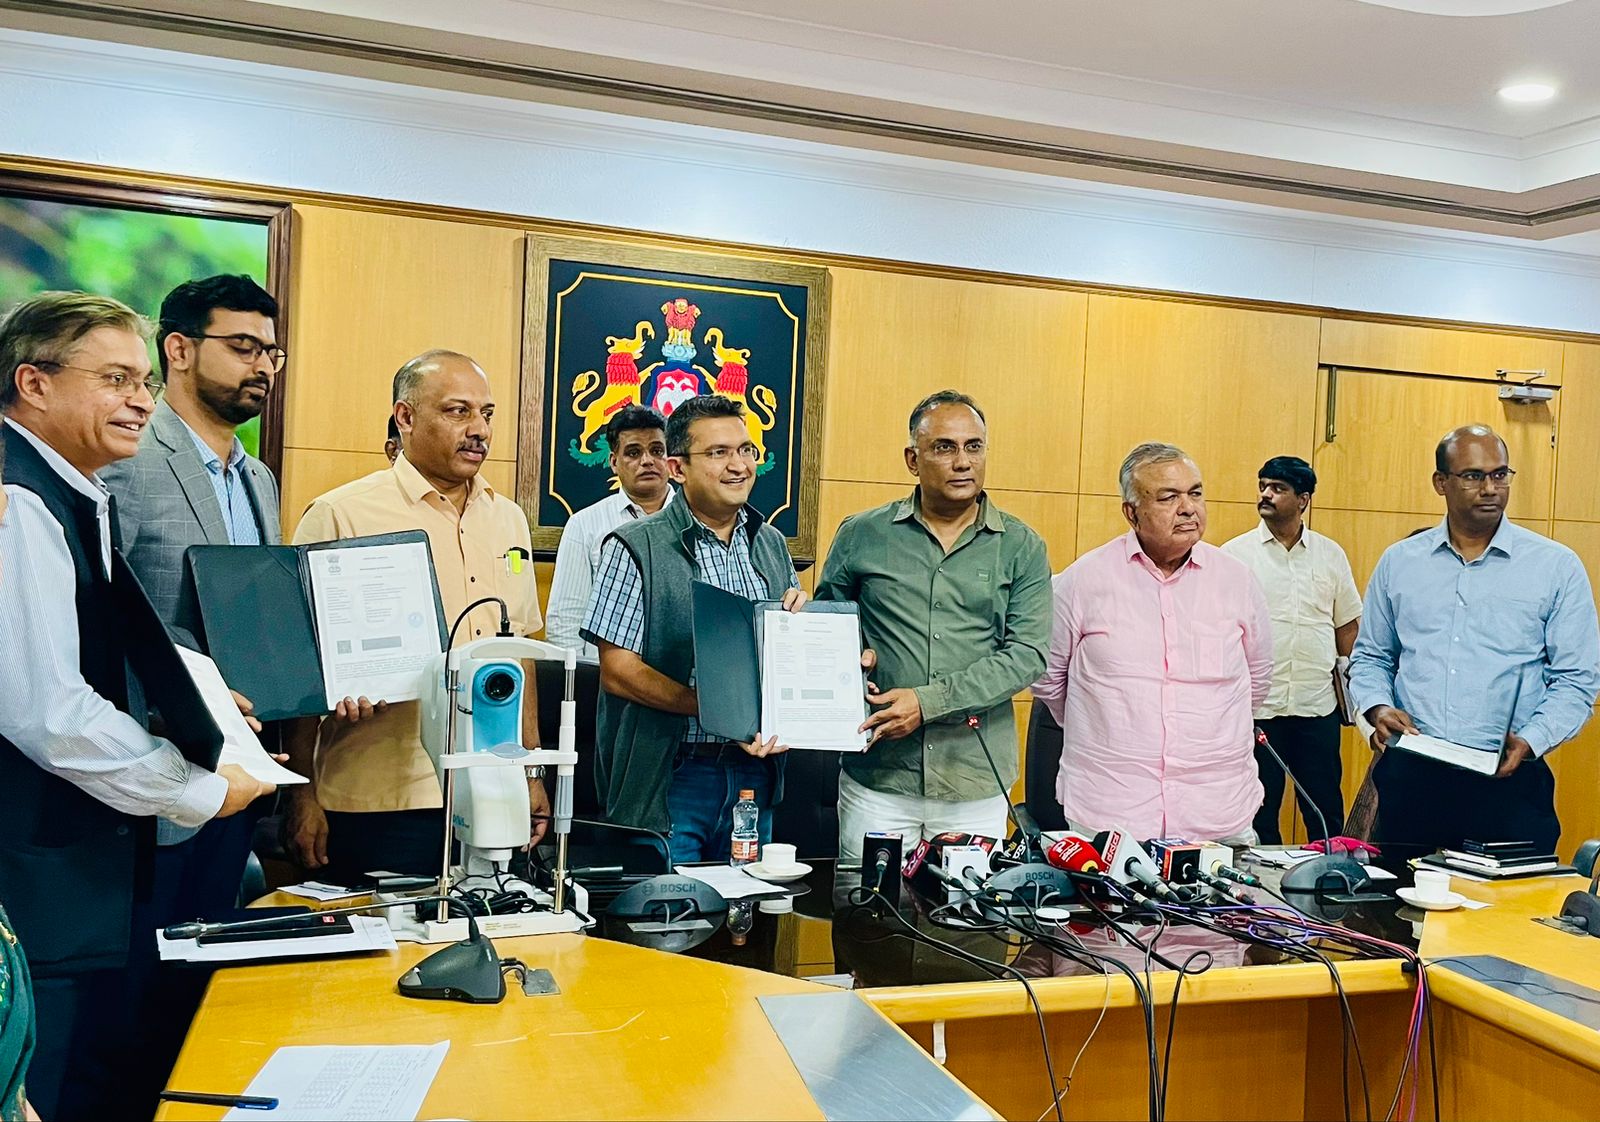 ACT collaborates with C-Camp and the government of Karnataka to improve eye care services in the state